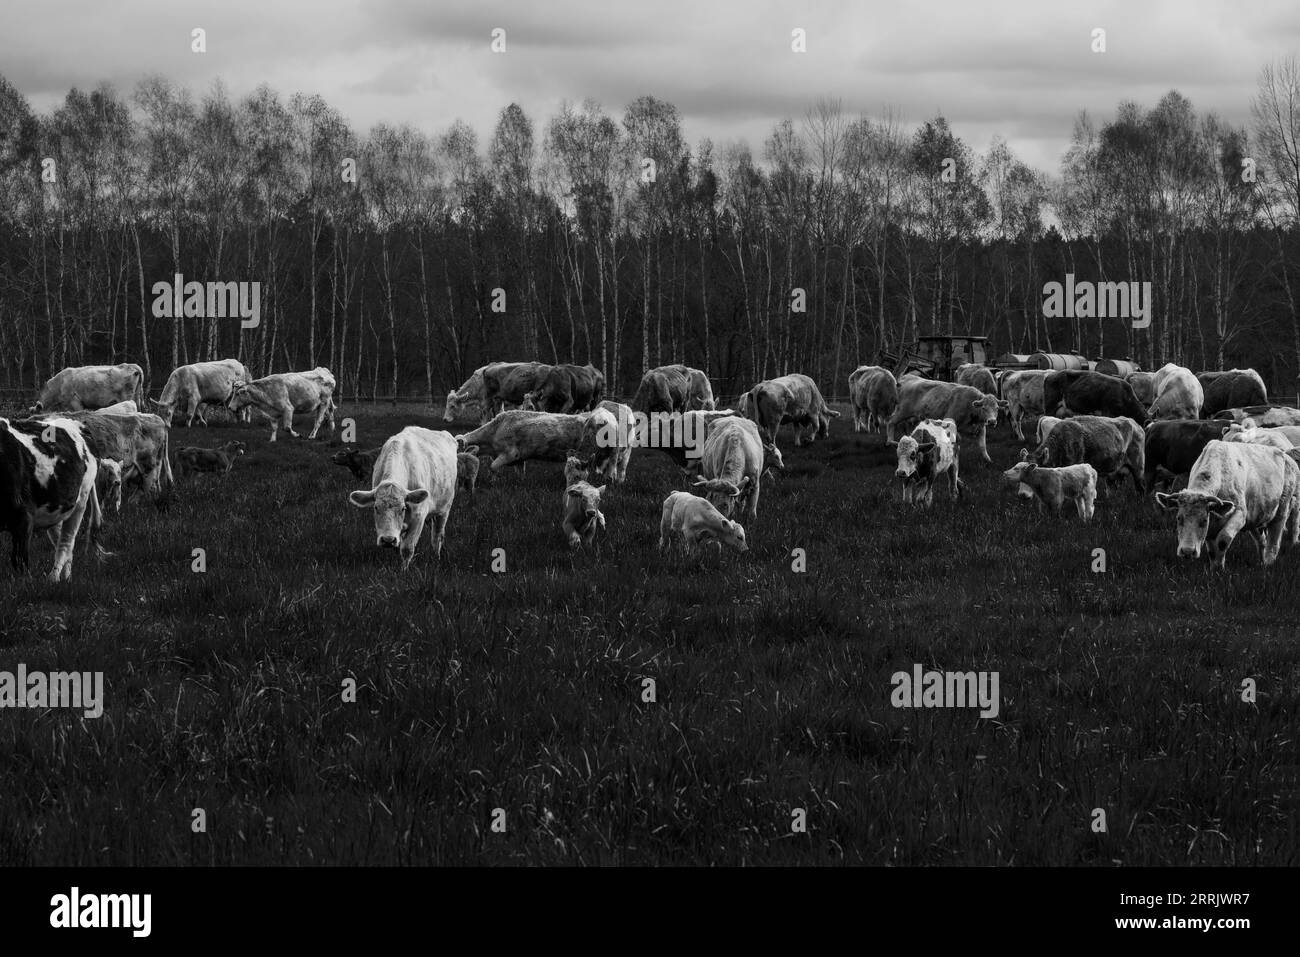 Suckler cows graze on a meadow together with their calves, black and white Stock Photo